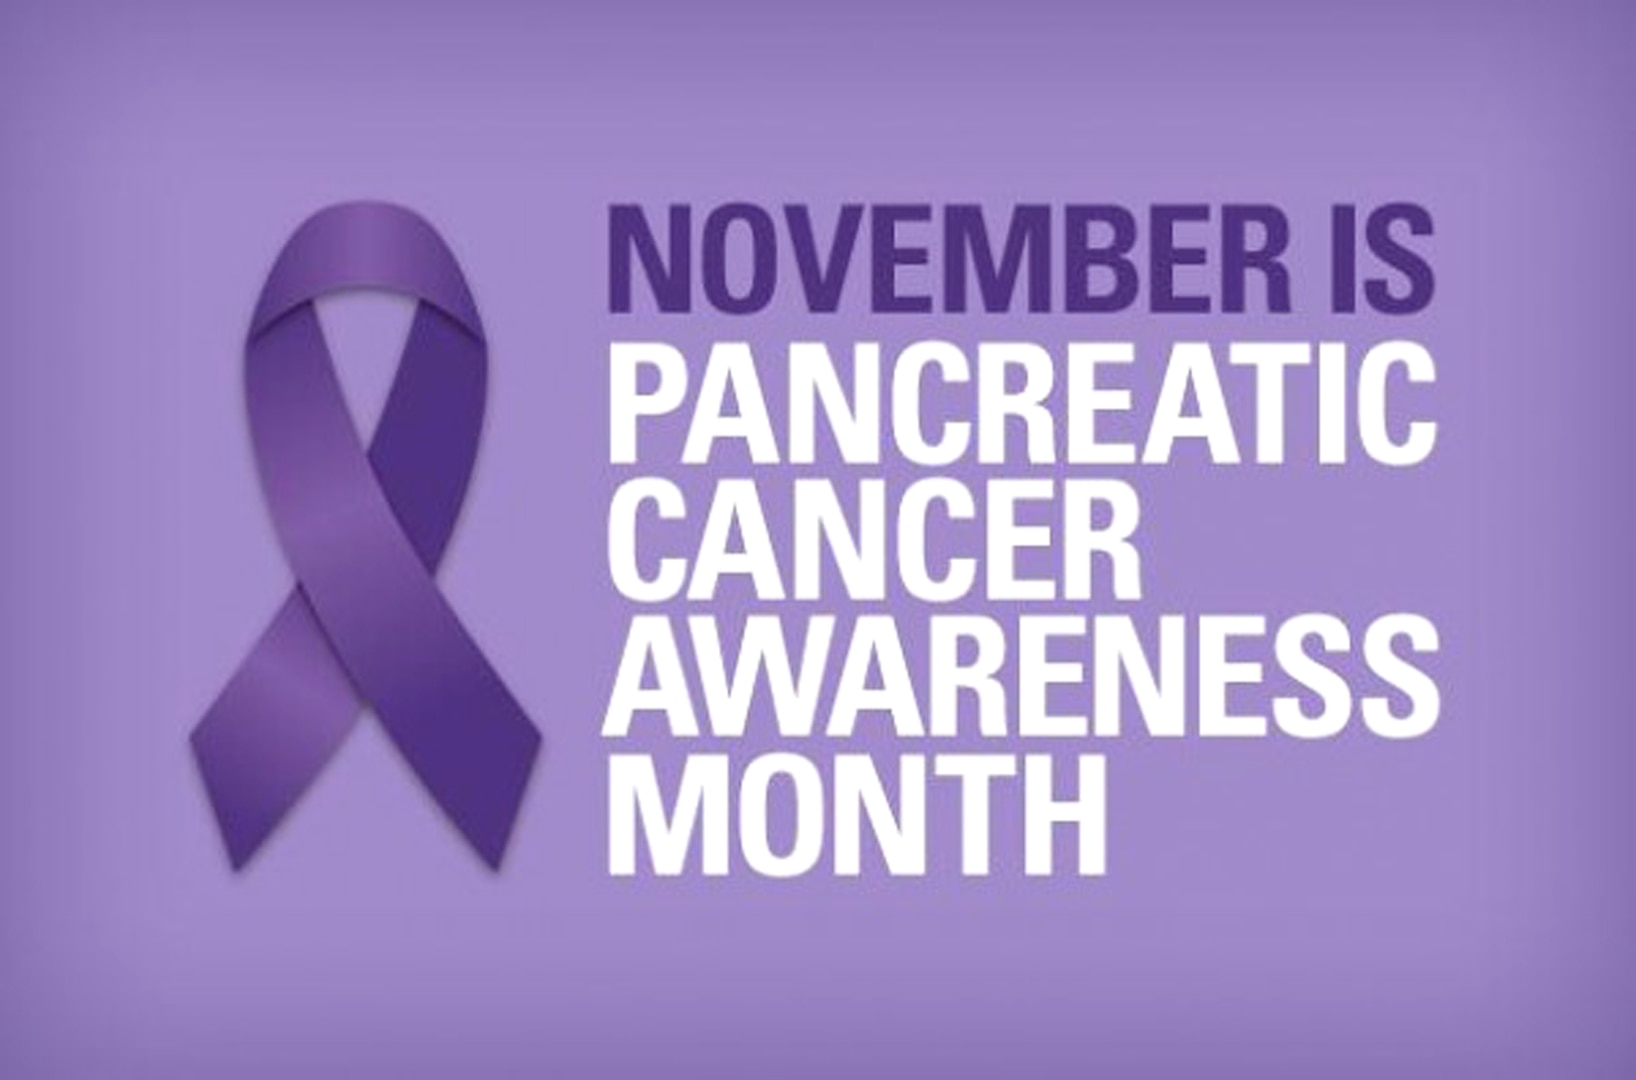 November is Pancreatic Cancer Awareness Month and Friday is World Pancreatic Cancer Day. Only three percent of people diagnosed with this disease survive this form of cancer, typically due to late diagnosis. Called the silent killer, pancreatic cancer has the lowest survival rate of all 22 common cancers according to http://www.pancreaticcanceraction.org.